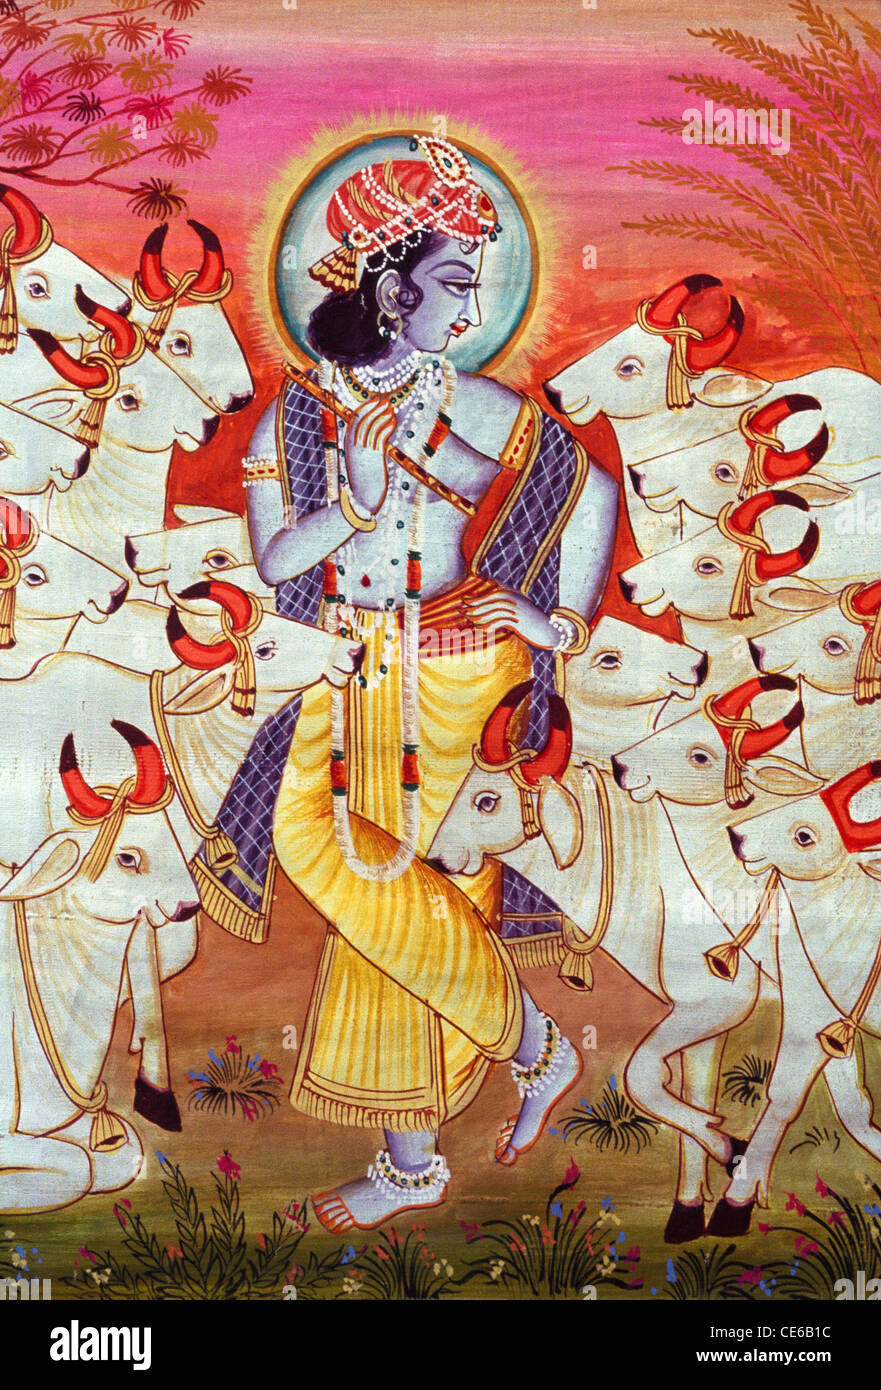 Lord Krishna with cows miniature painting Stock Photo